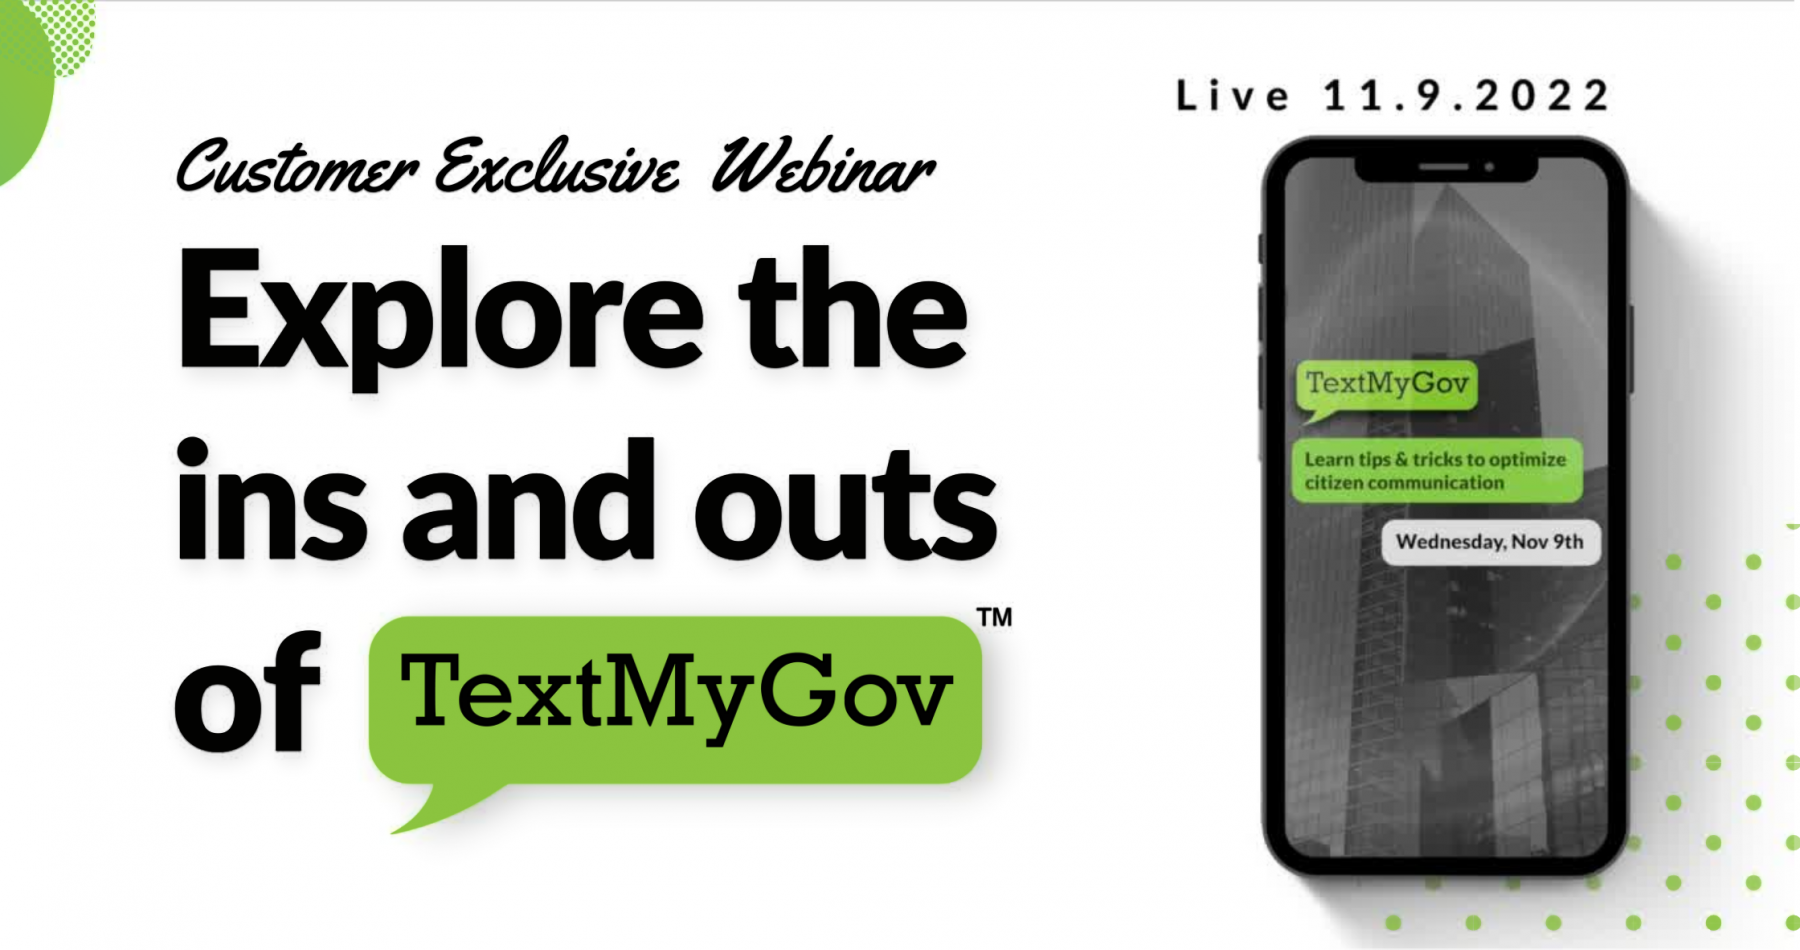 Explore the ins and outs of TextMyGov